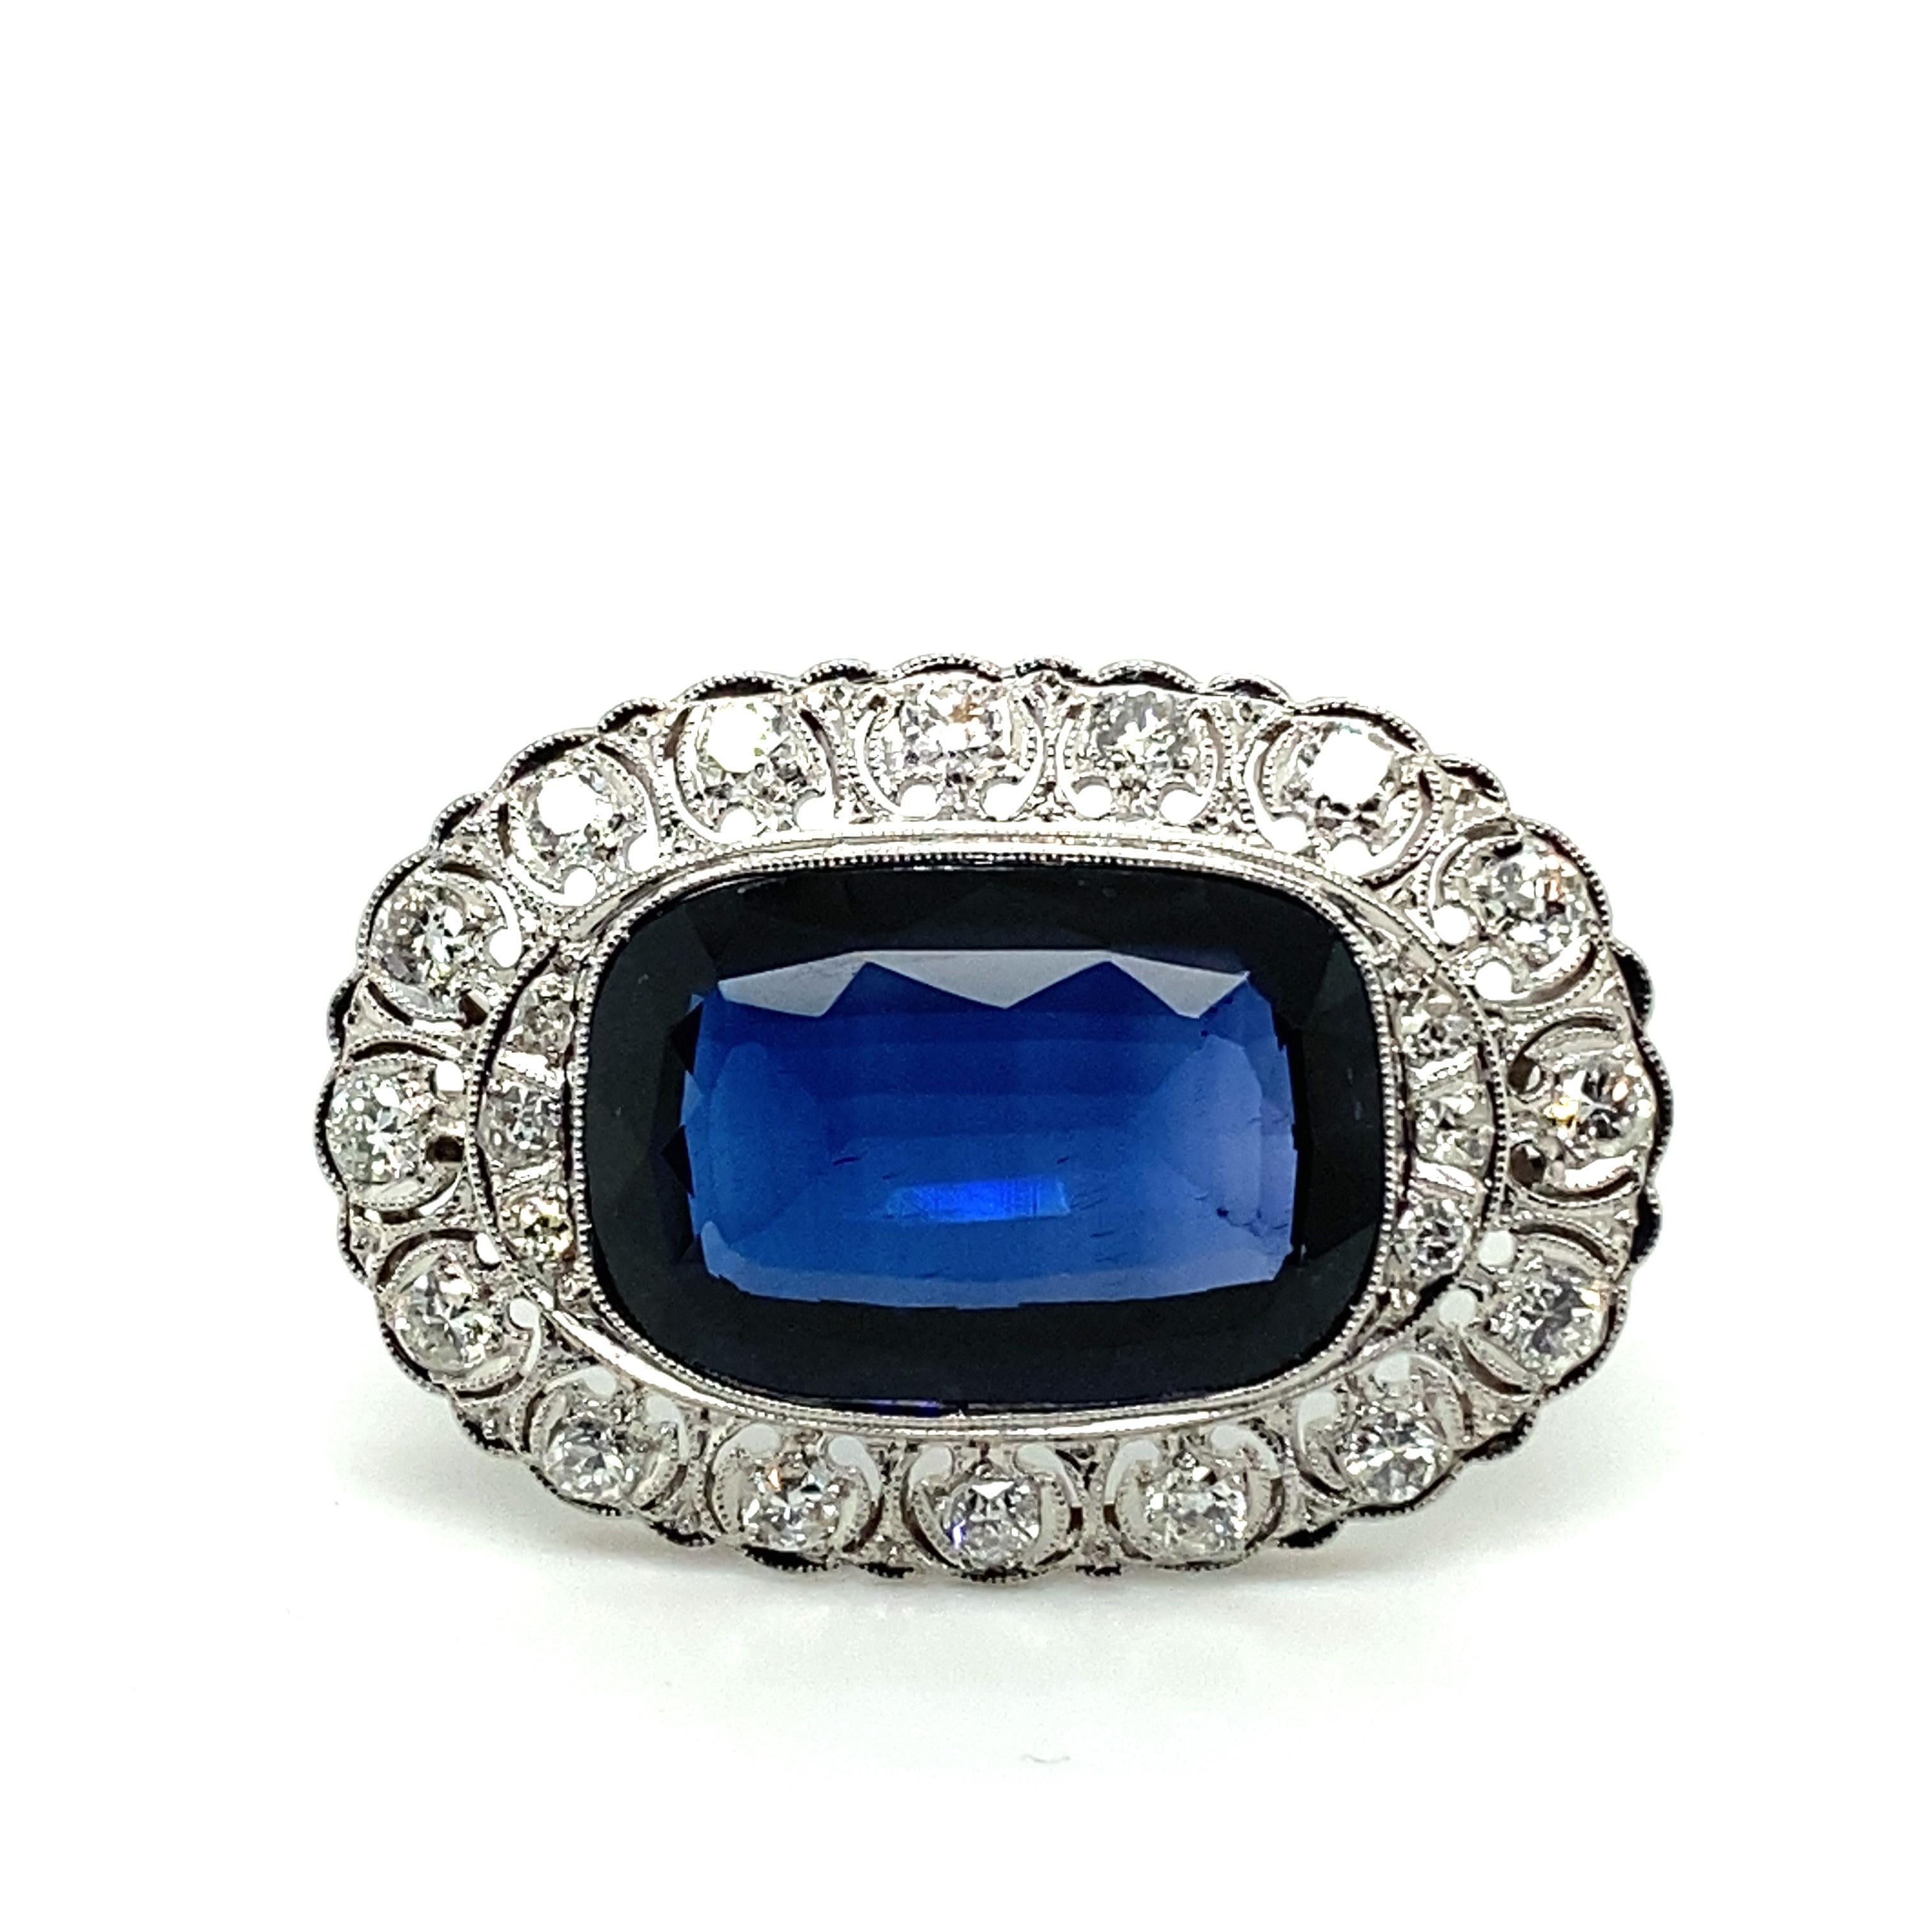 This elegant brooch is inspired by the finely crafted jewellery of the Edwardian era. This handmade brooch is handcrafted in 14 karat white gold and set with a cushion-shaped synthetic sapphire of approximately 11.00 carats.
The entourage is set